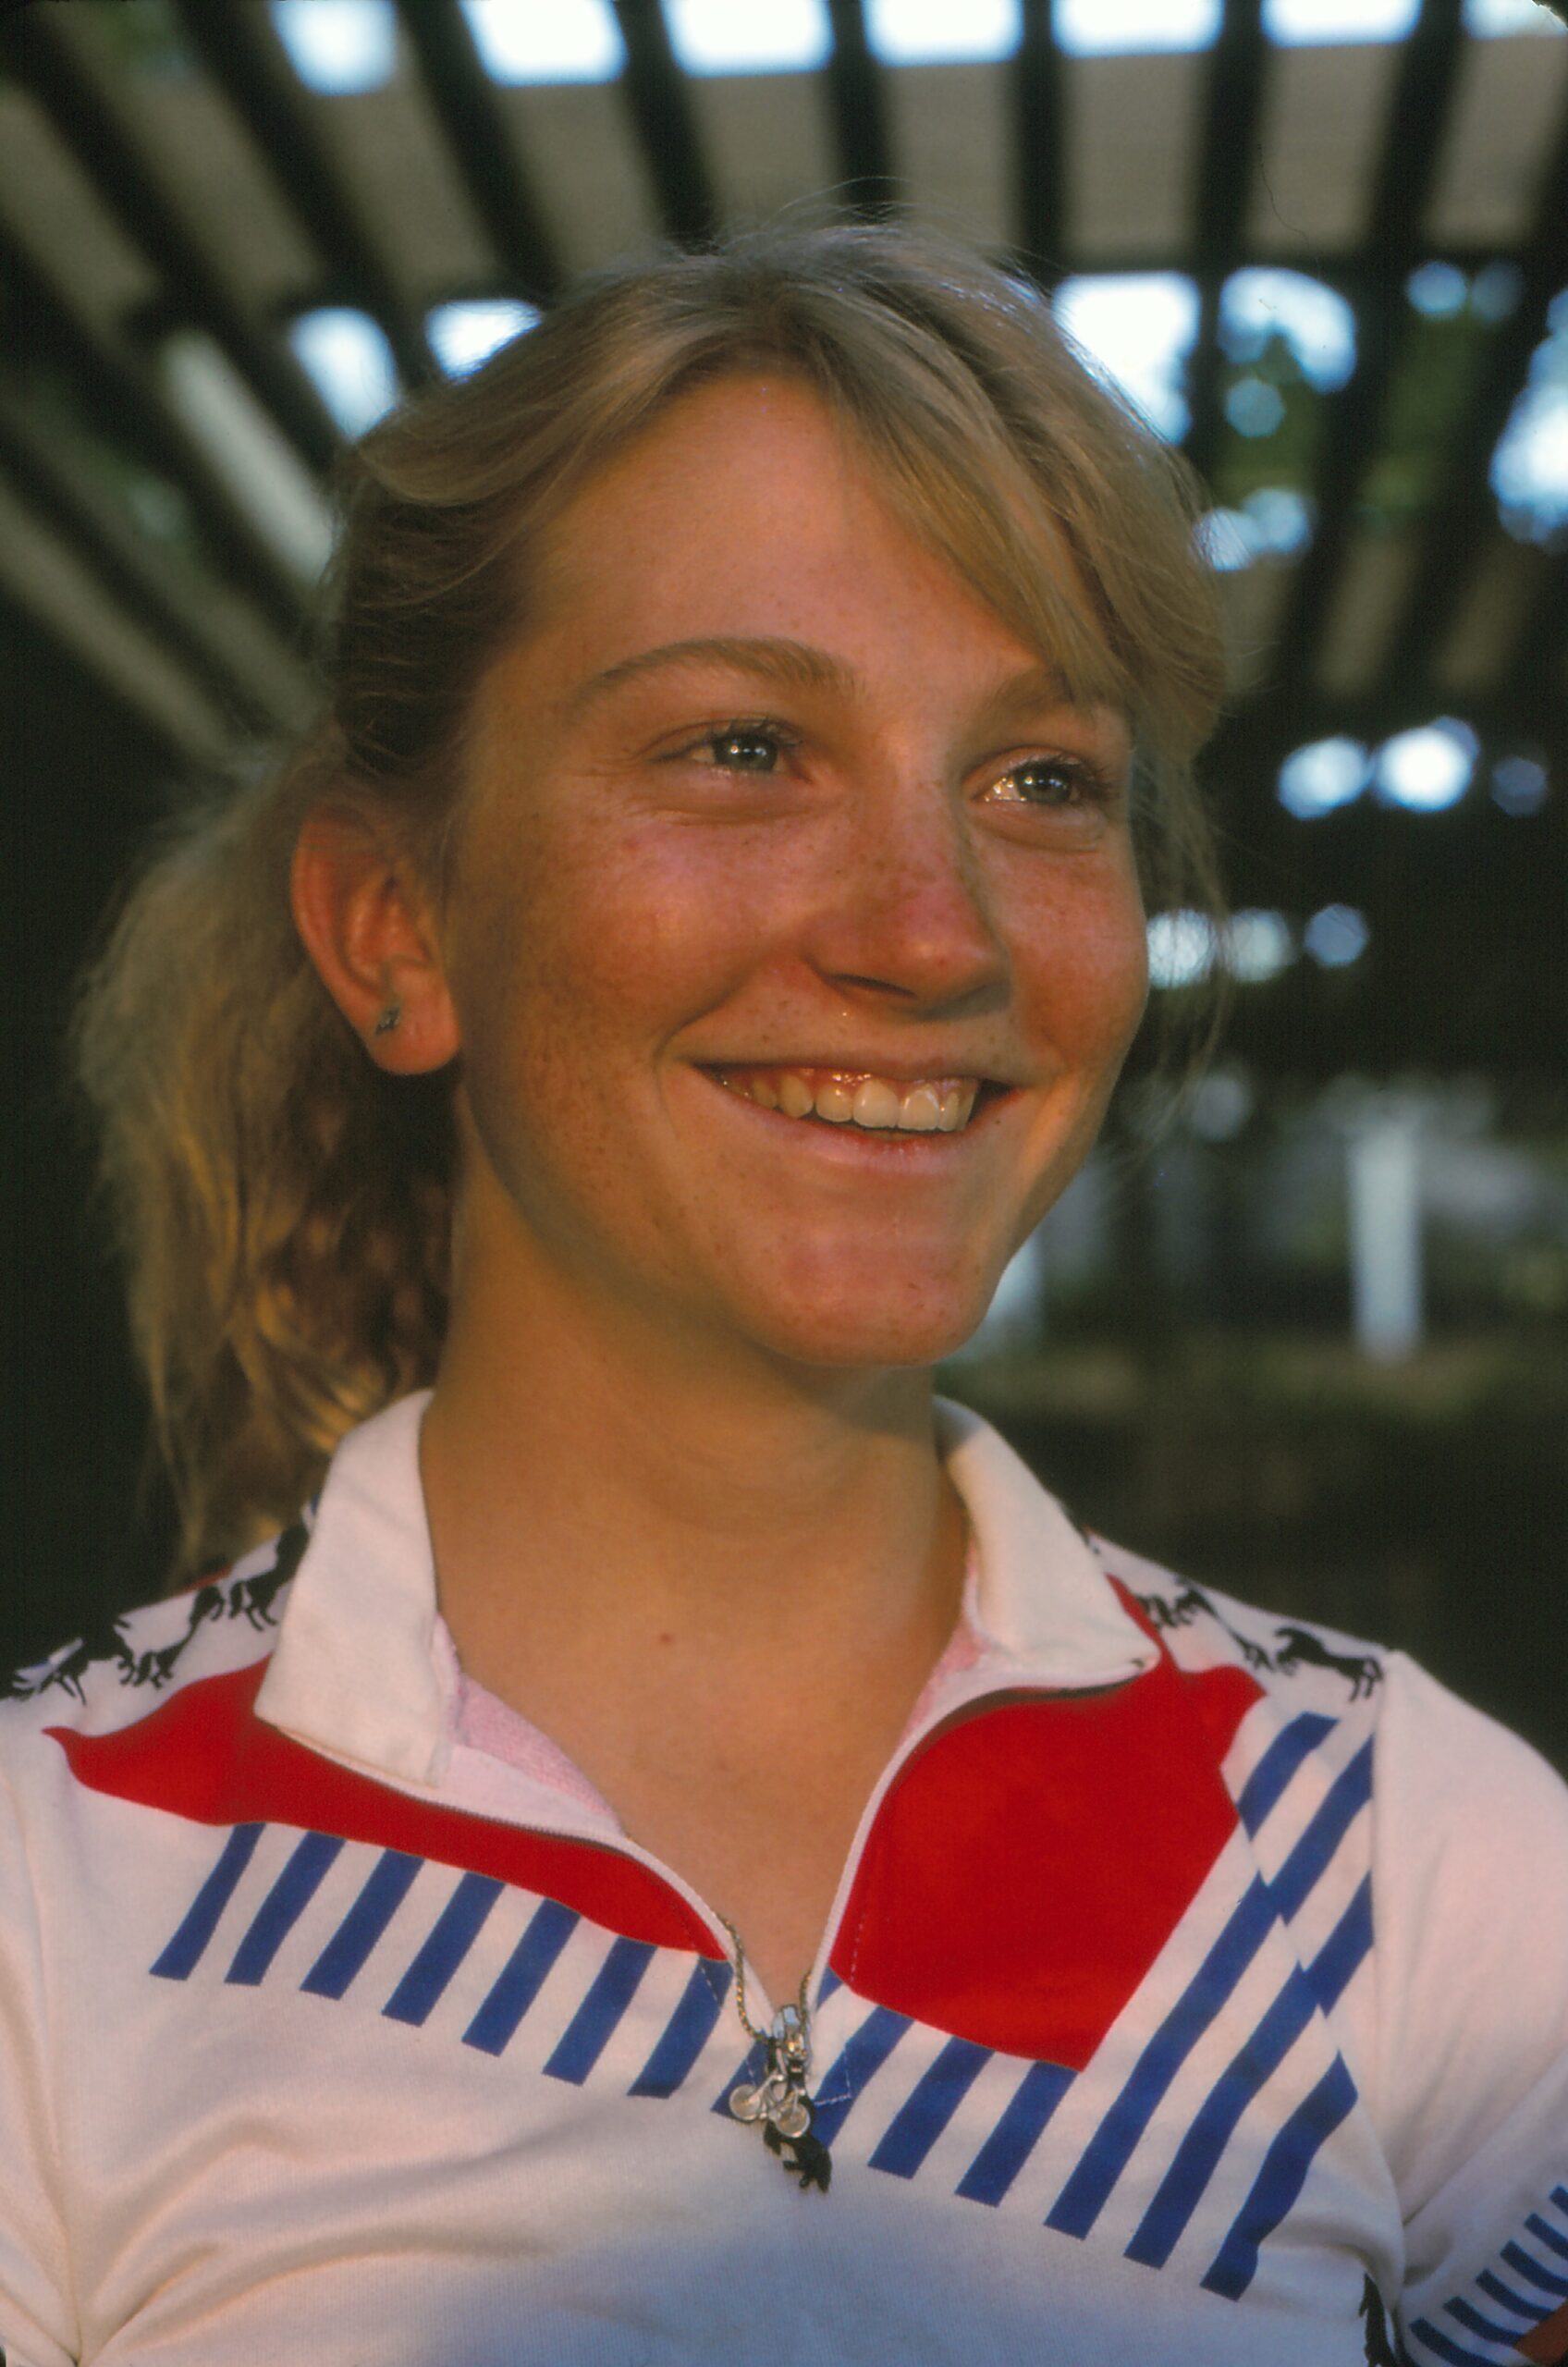 denise mueller in lessons in cycling